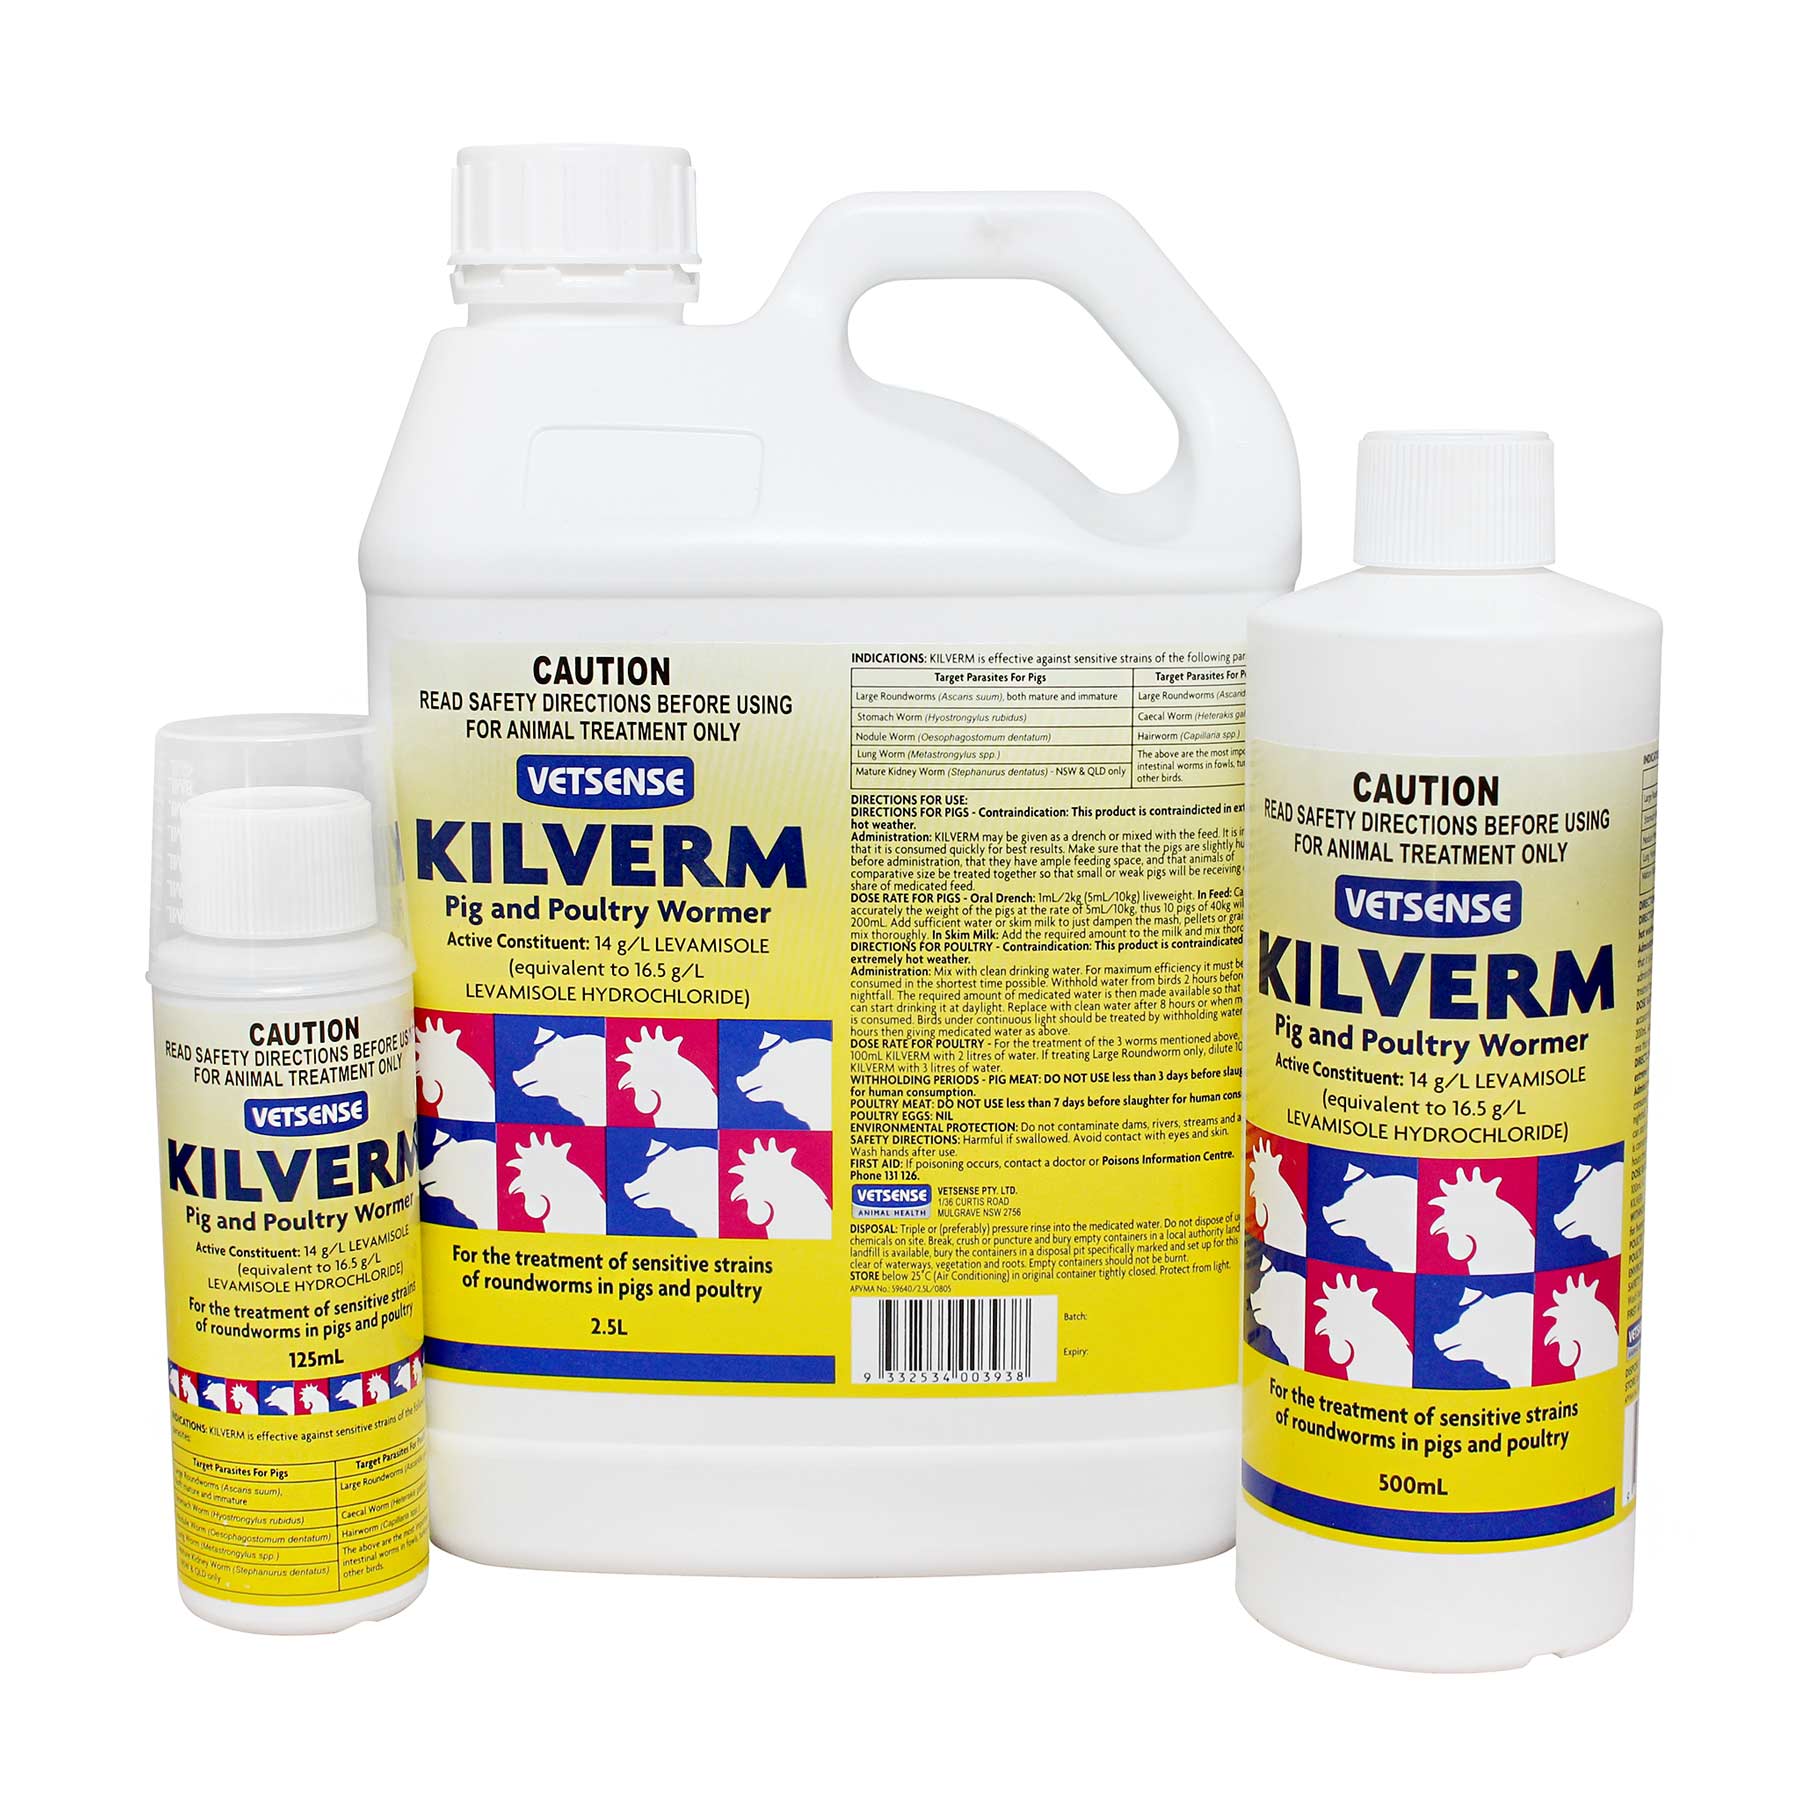 Kilverm Pig and Poultry Wormer